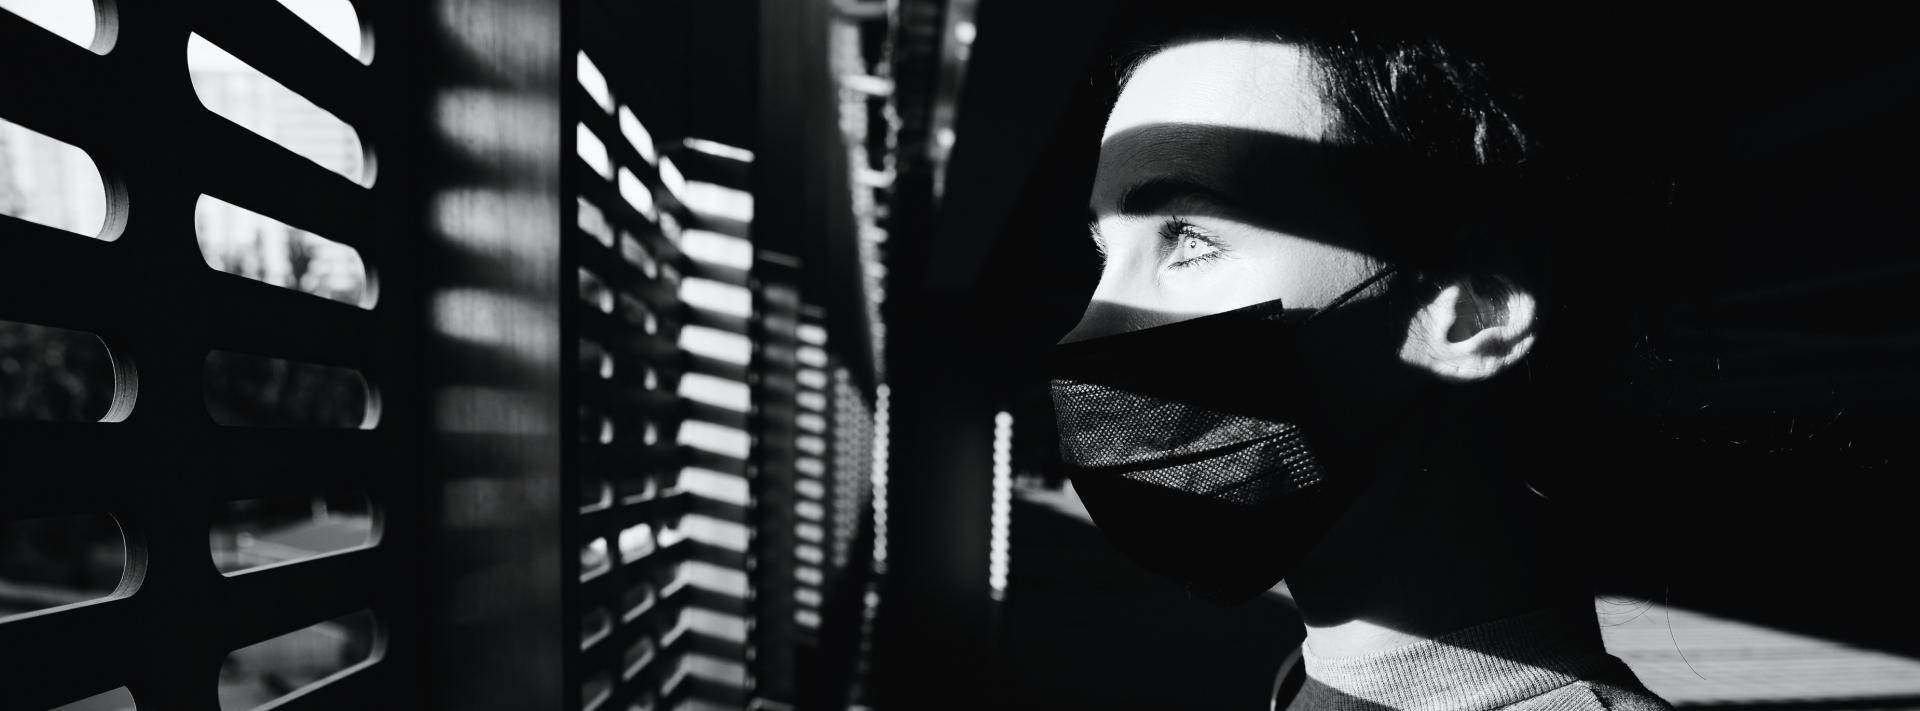 woman wearing mask while looking out blinds - black and white image